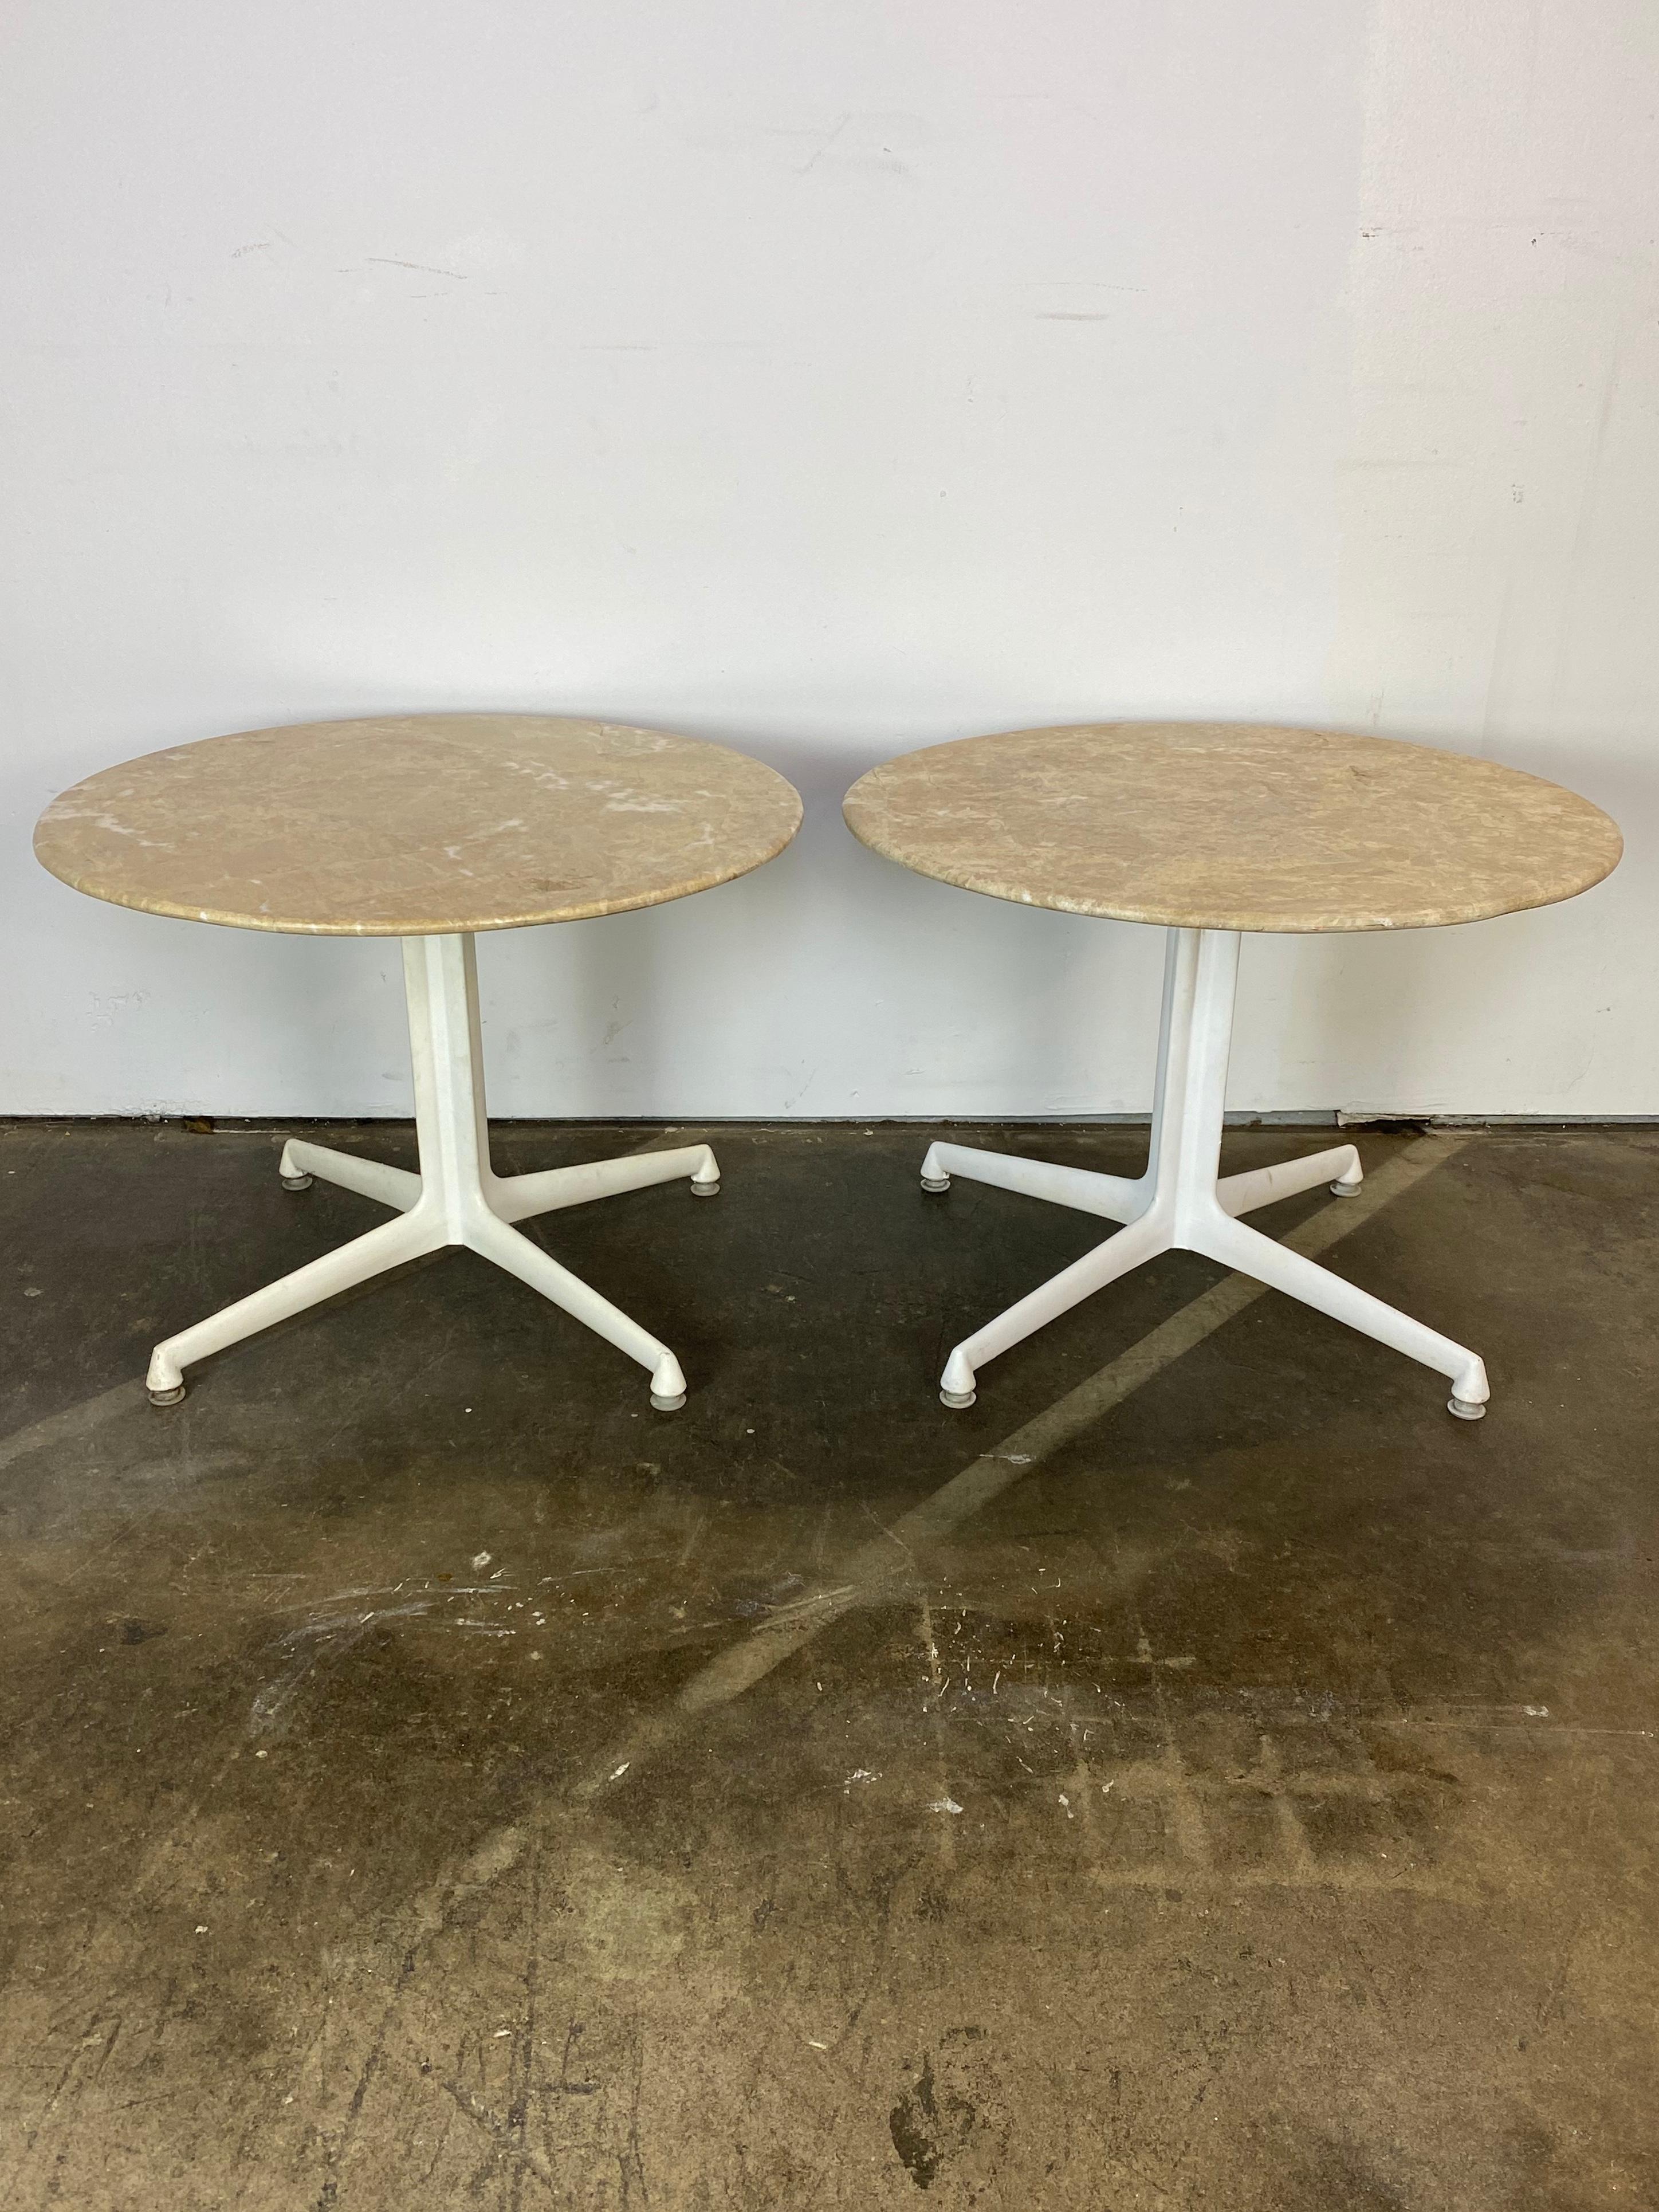 Gorgeous pair or travertine marble side tables. Circular heavy tops rest upon white metal bases in the style of the Eames La Fonda base. Sturdy and firm, these tables are elegant to use at the ends of a sofa, yet large enough to use as bedside